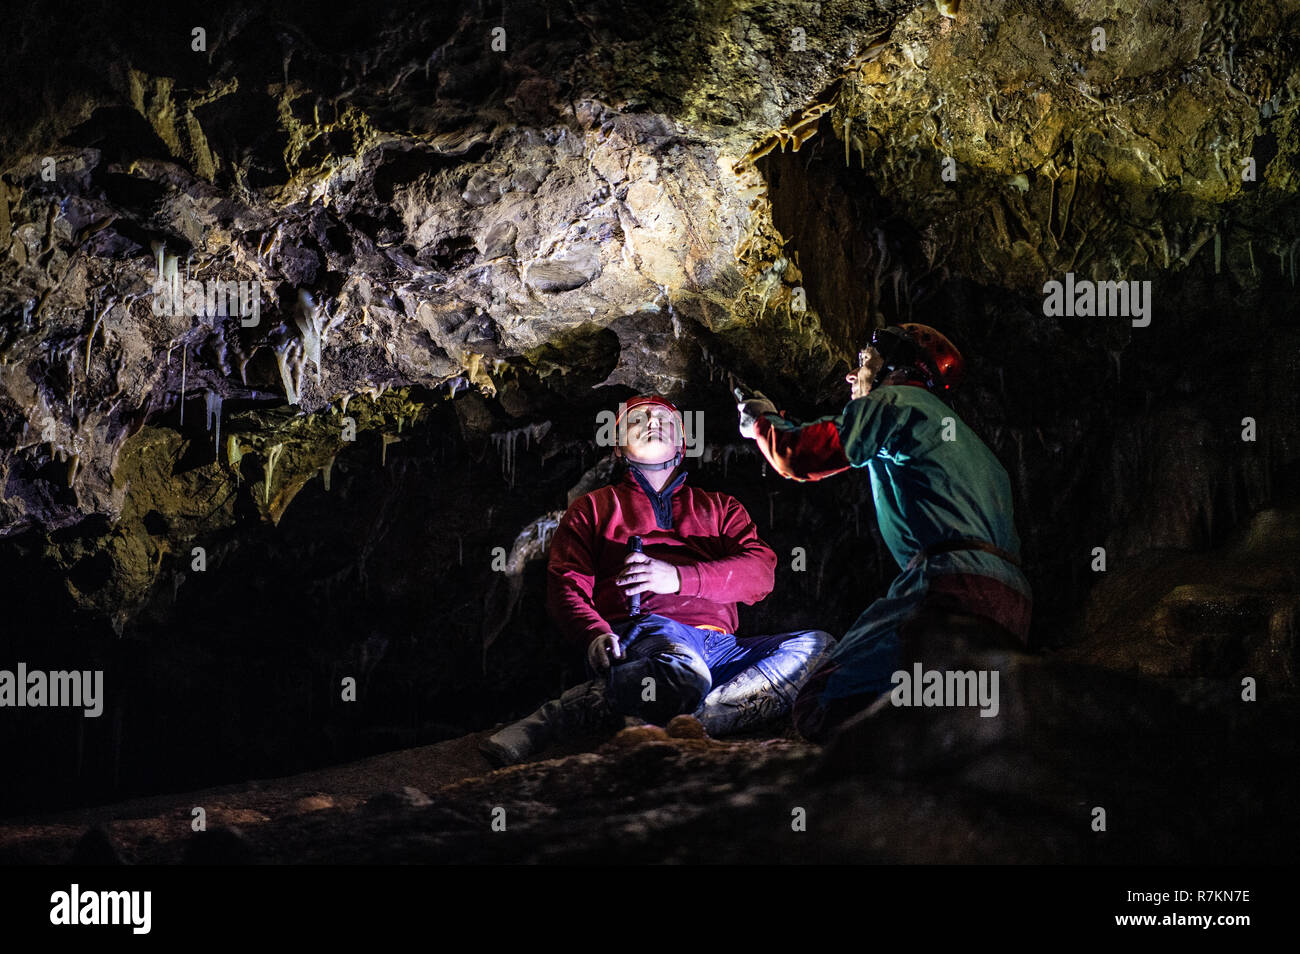 20 November 2018, North Rhine-Westphalia, Bad Wünnenberg: Cave explorers Andreas Schudelski (l) and Stefan Henscheid use their torches to illuminate the greenish-blue stalactites hanging from the ceiling of the Malachite Cathedral stalactite cave. The stalactite cave in the middle of a producing quarry has been saved for the time being. As a spokeswoman of the Paderborn district reported on 10.12.2018, an application by the quarry operator to dismantle the cave, which is under nature conservation, was rejected. Due to its enormous dimensions and the blue and green stalactites, the cave occupie Stock Photo